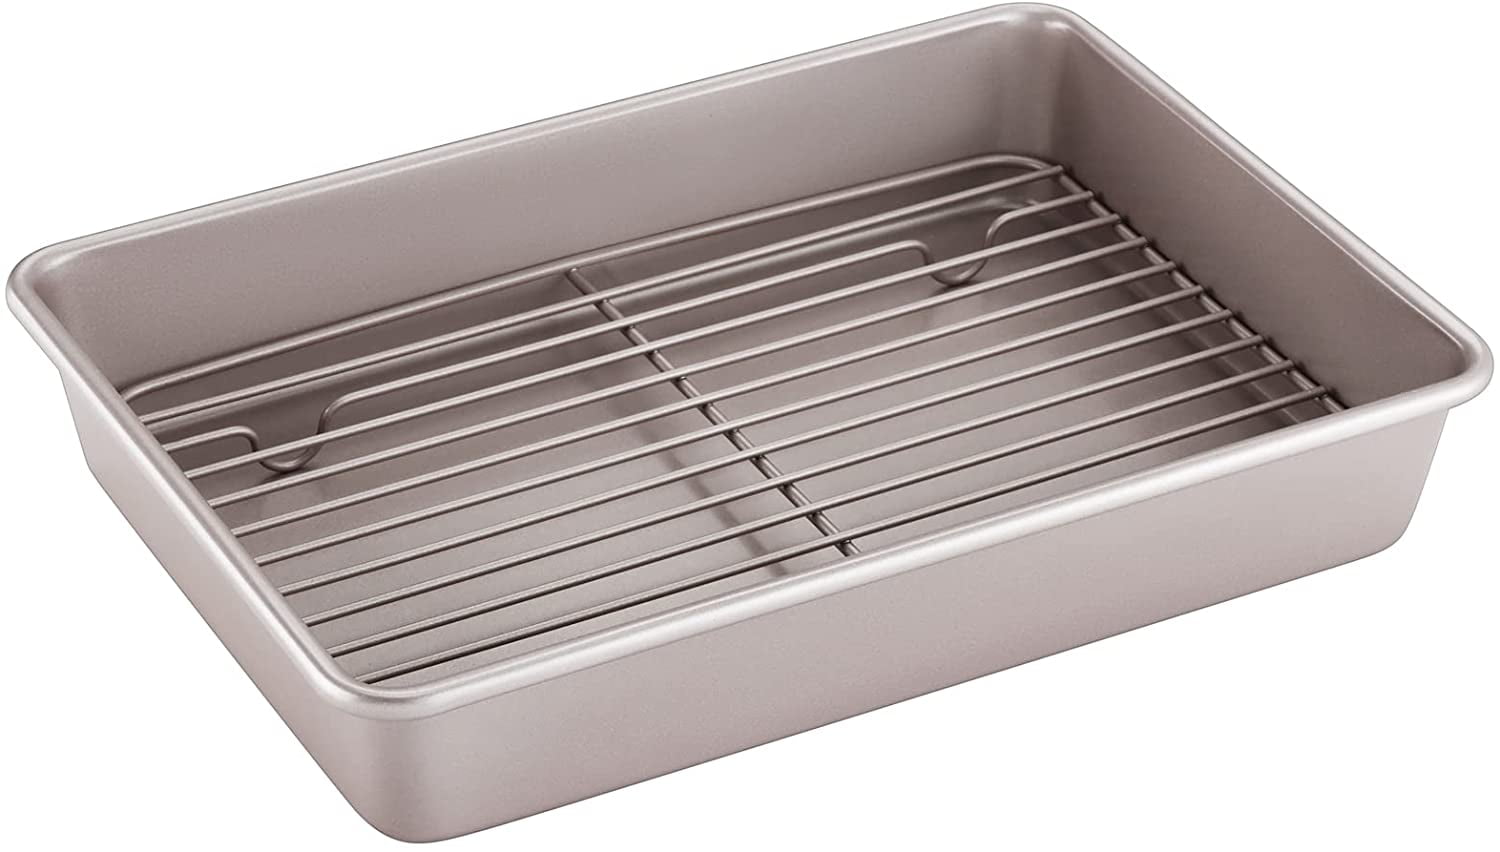 Nordic Ware Aluminum Oven Bacon Pan with Nesting Rack, 12.7 x 17.4 x 1.6